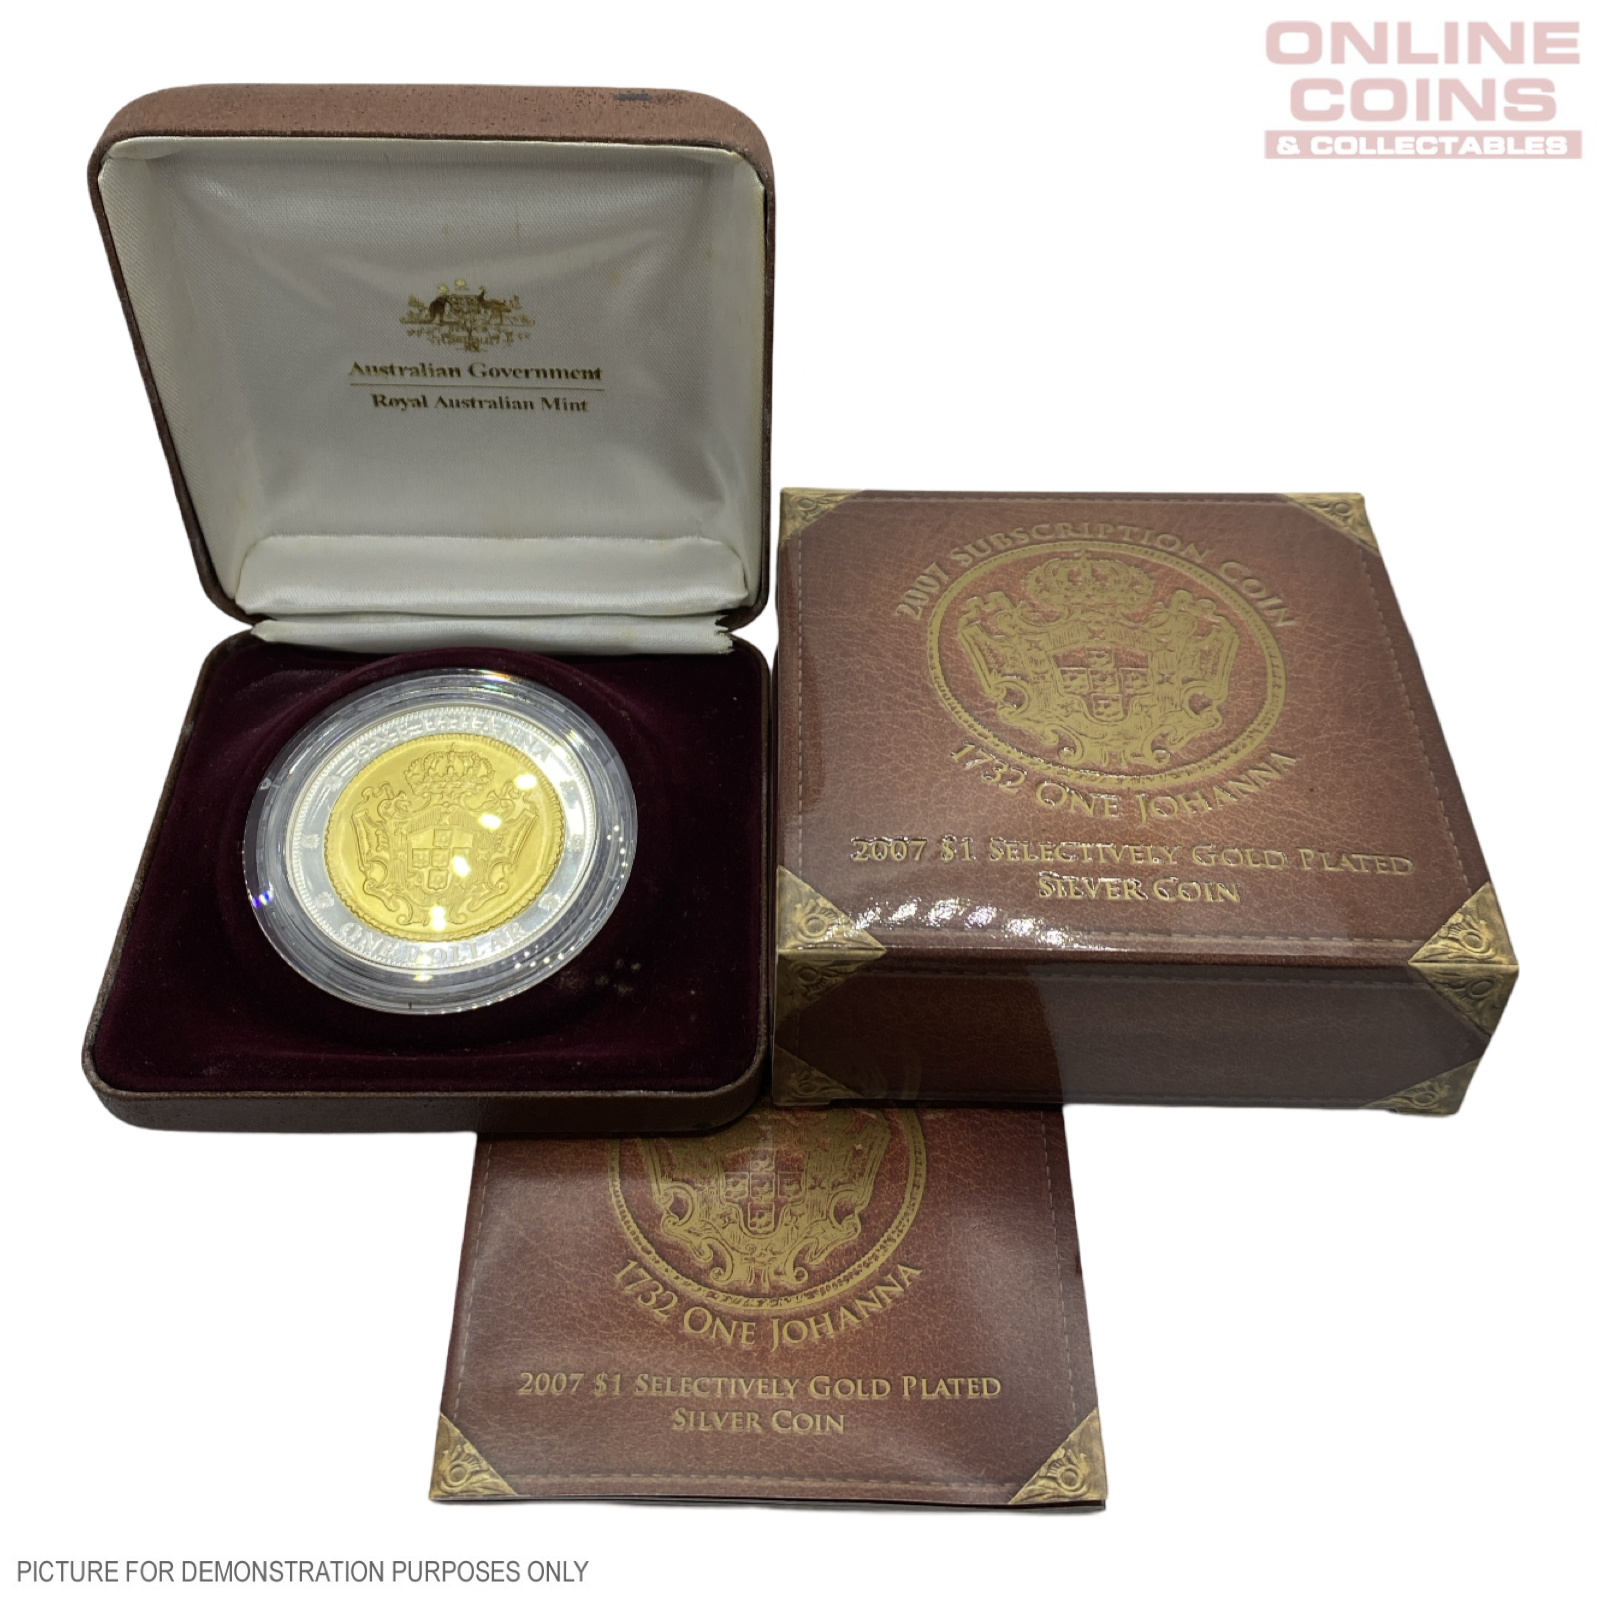 2007 Subscription Coin $1 Selectively Gold Plated Silver - 1732 One Johanna